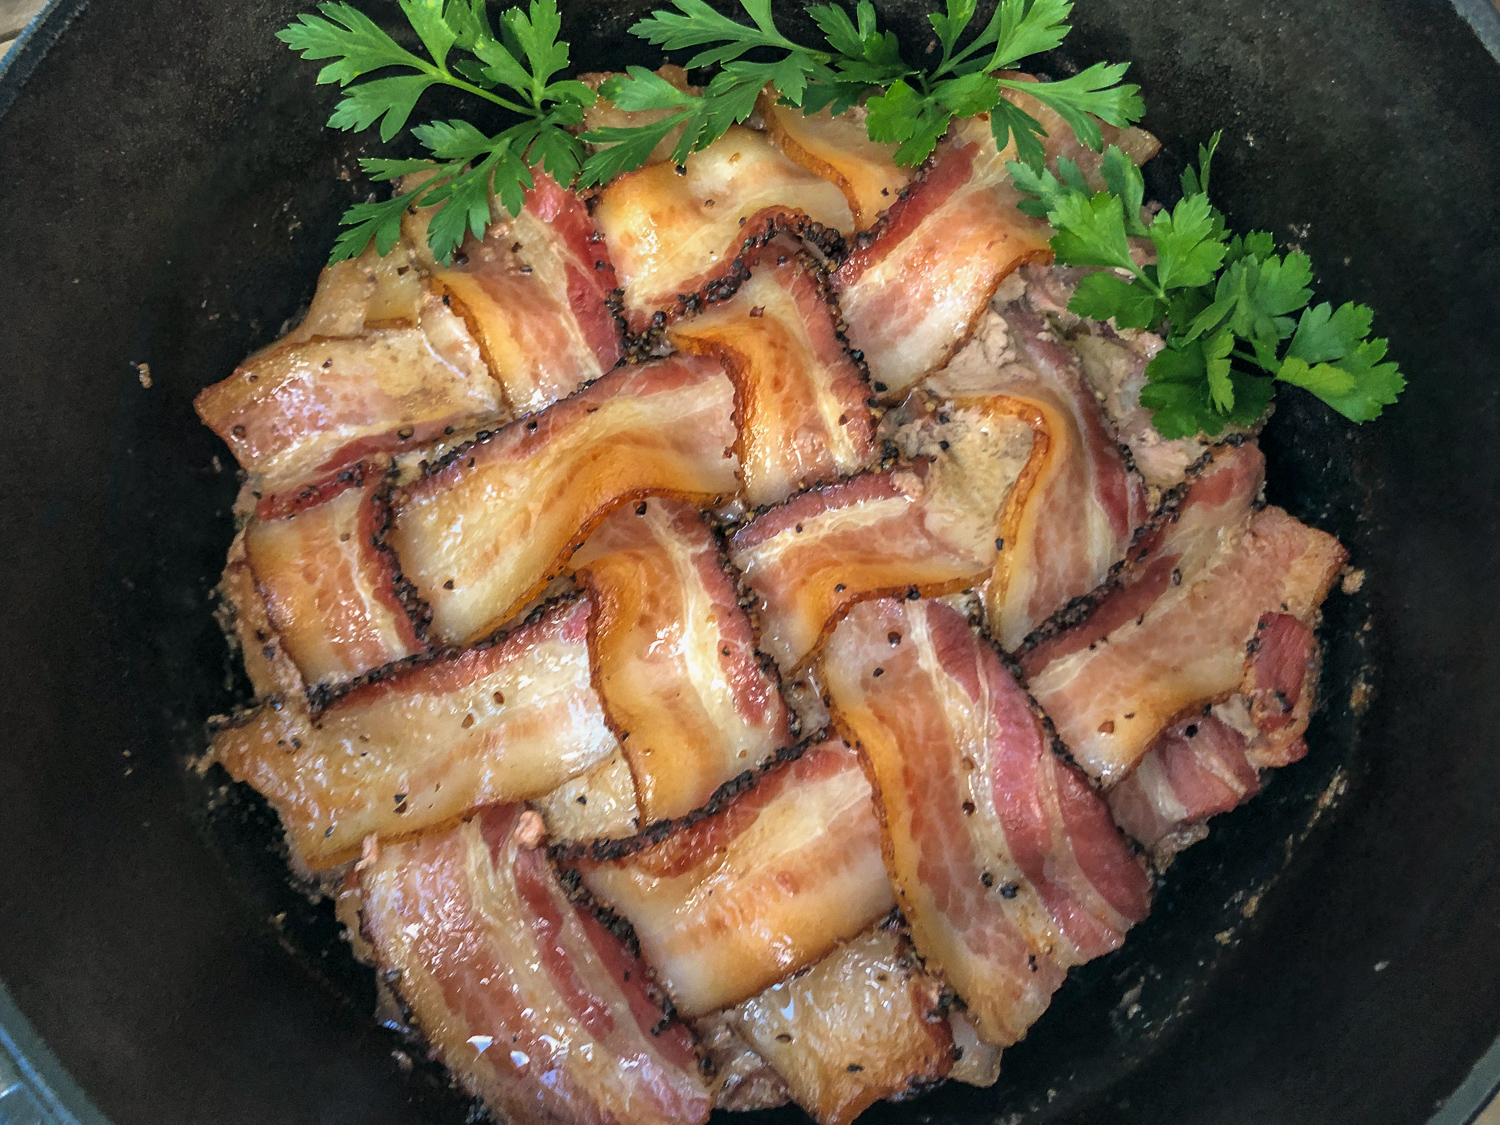 Cooked Dutch oven peppered bacon meatloaf garnished with fresh parsley